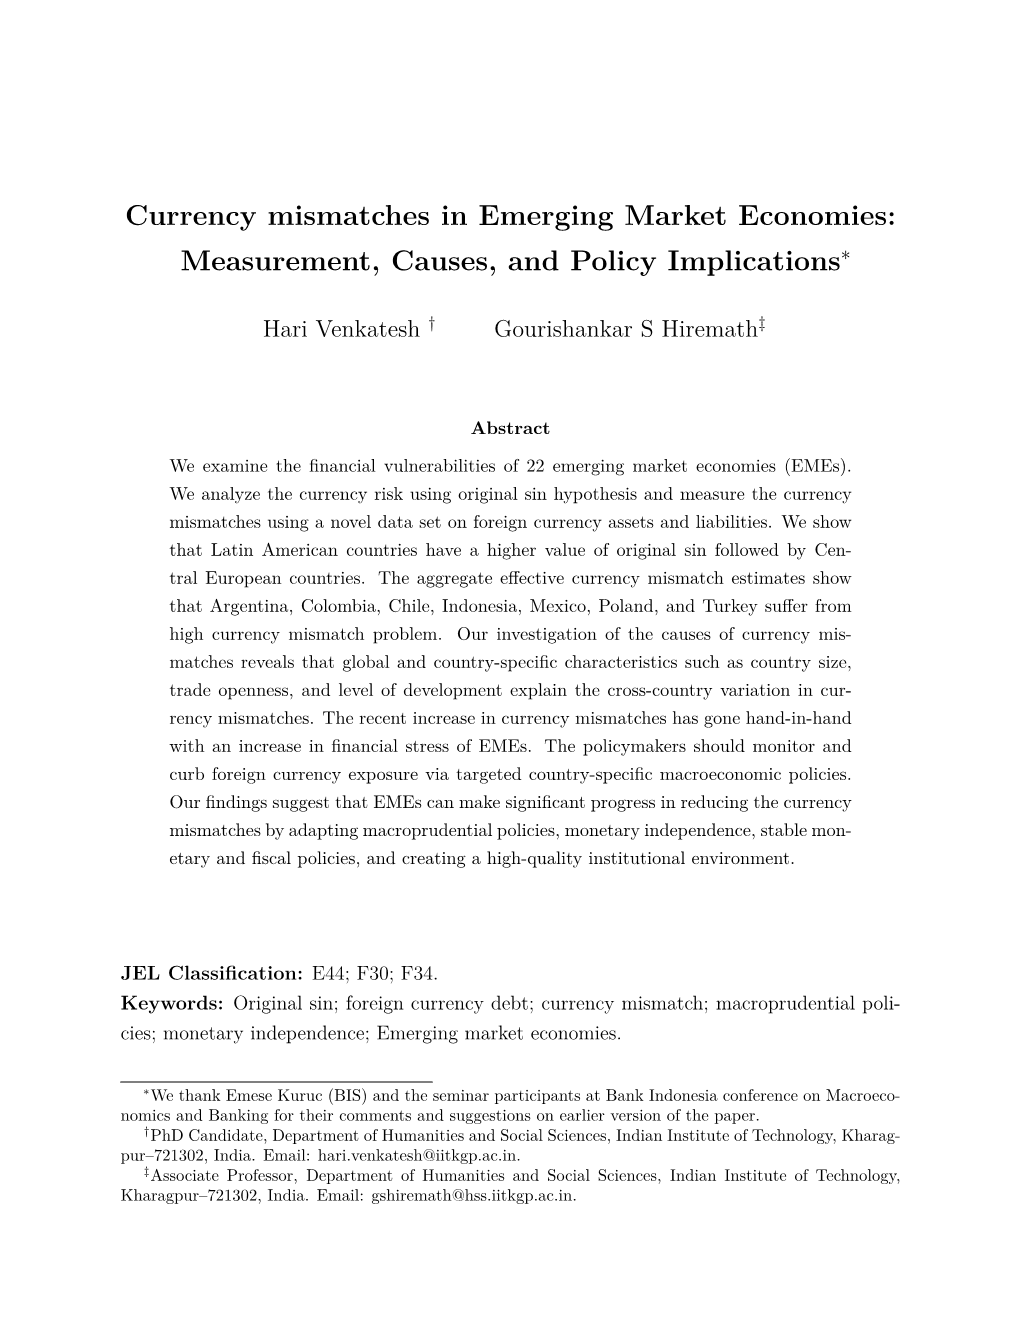 Currency Mismatches in Emerging Market Economies: Measurement, Causes, and Policy Implications∗